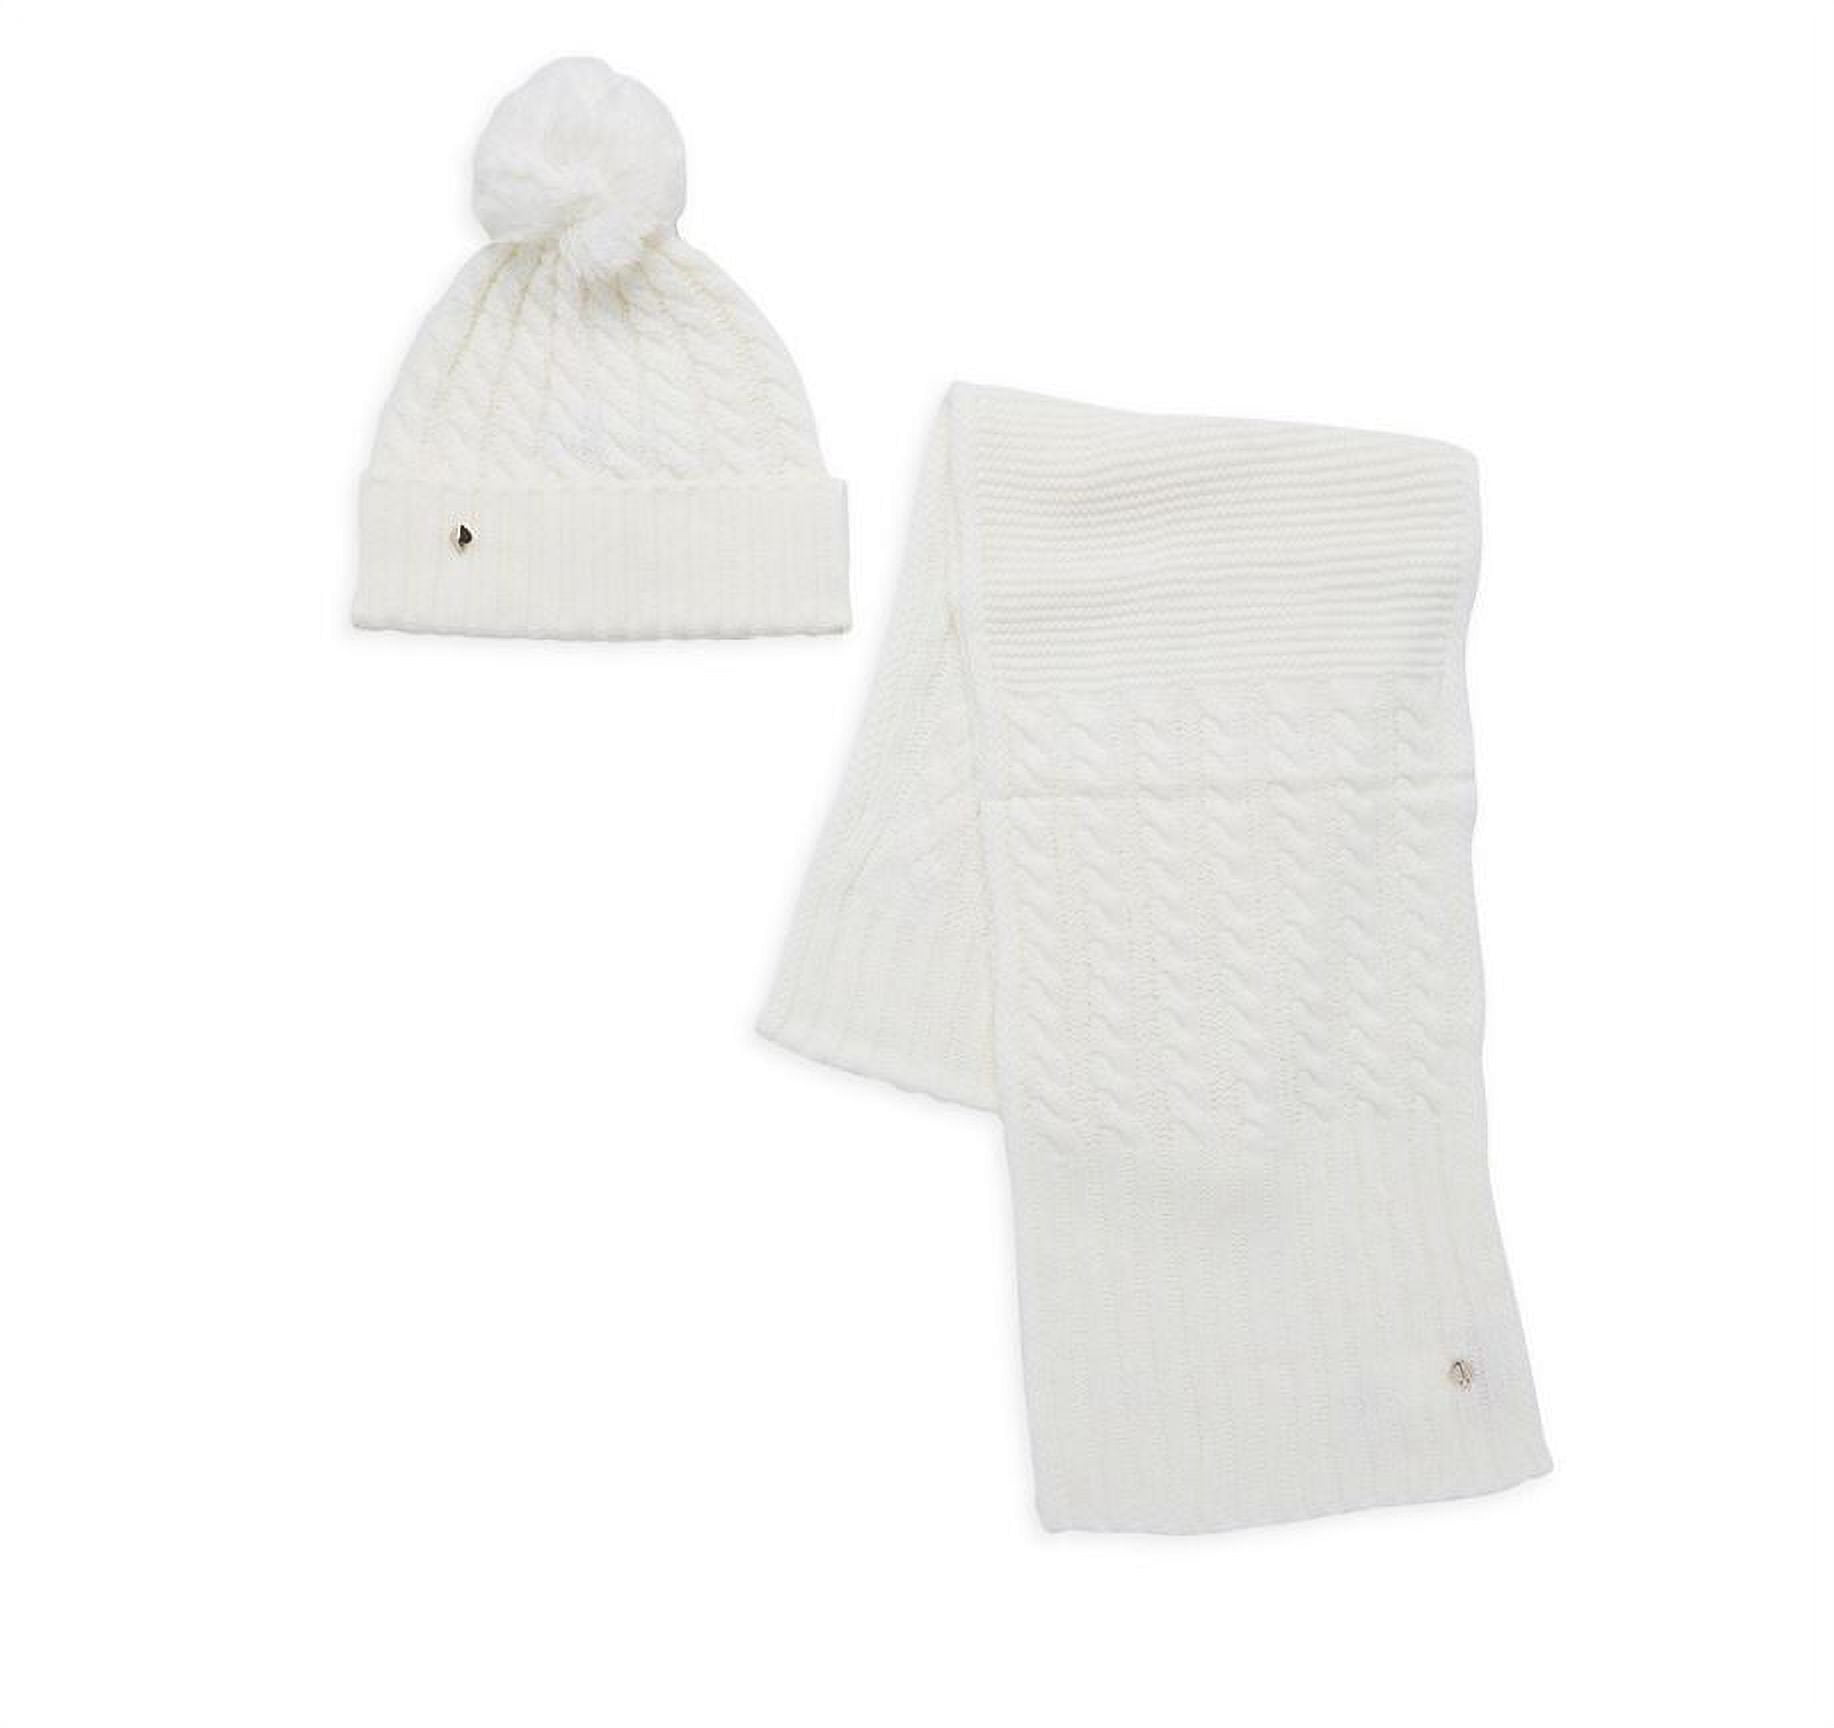 Kate Spade New York Cable-Knit Beanie Hat & Muffler Scarf Set French Cream  for Women